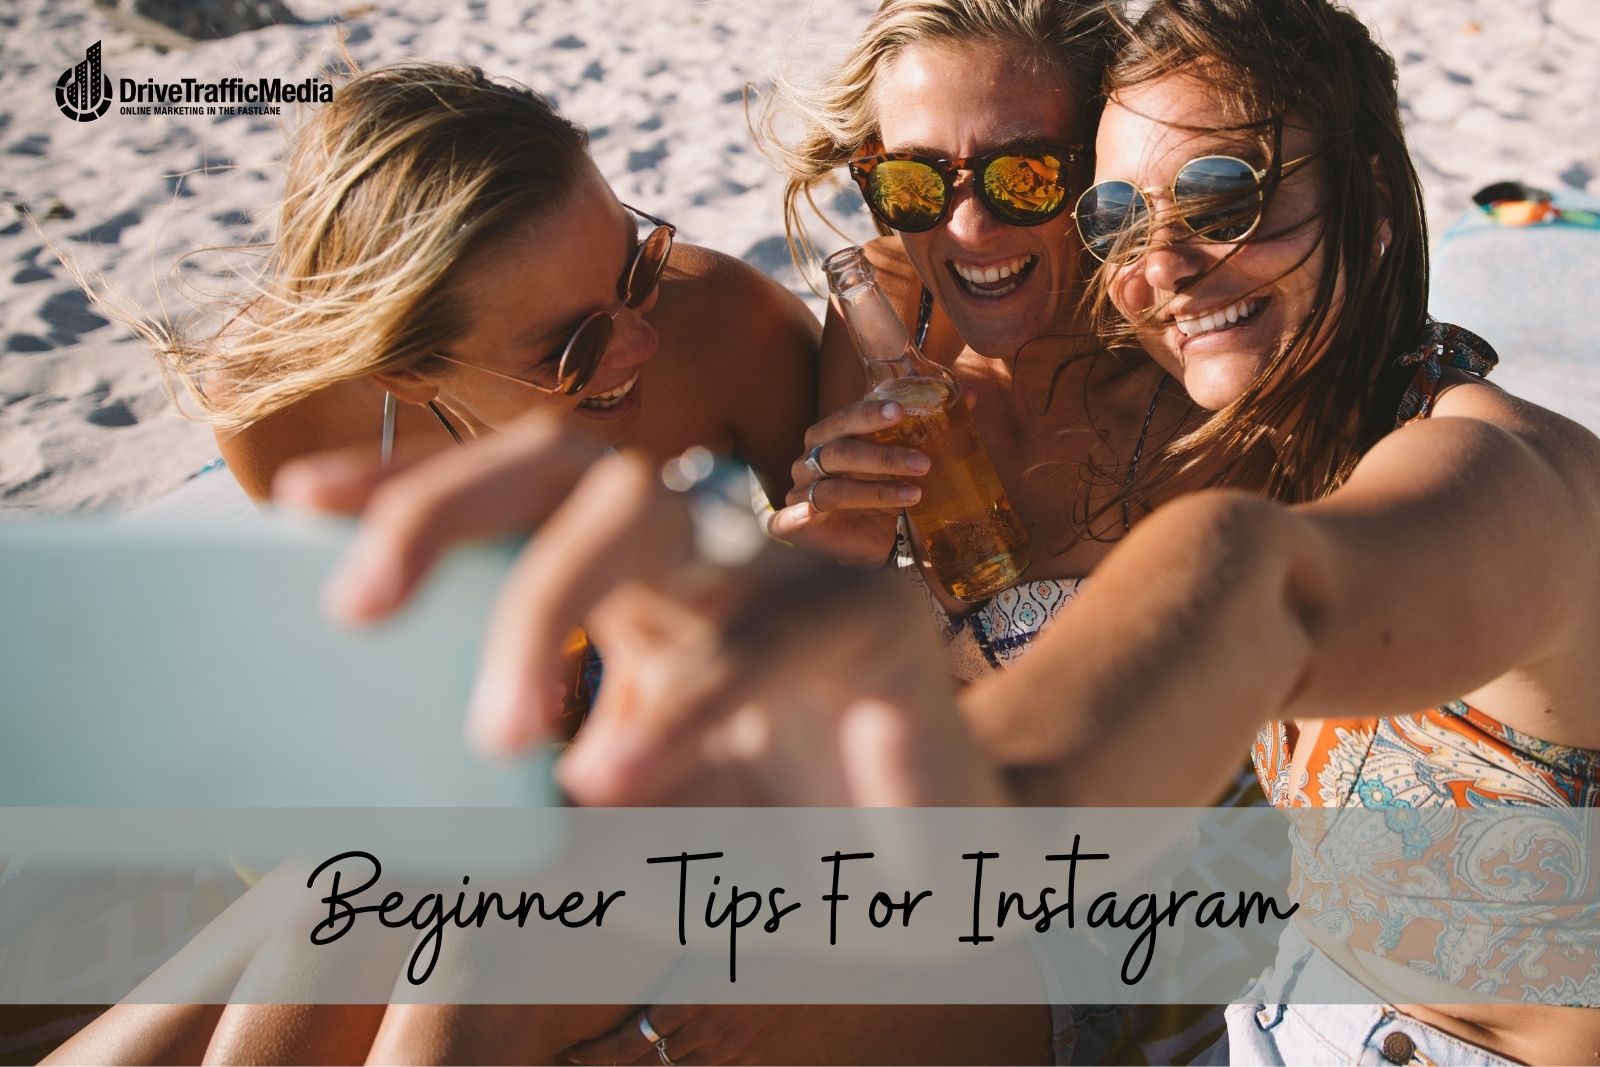 For those marketing on social media, getting started on Instagram can be the key to it